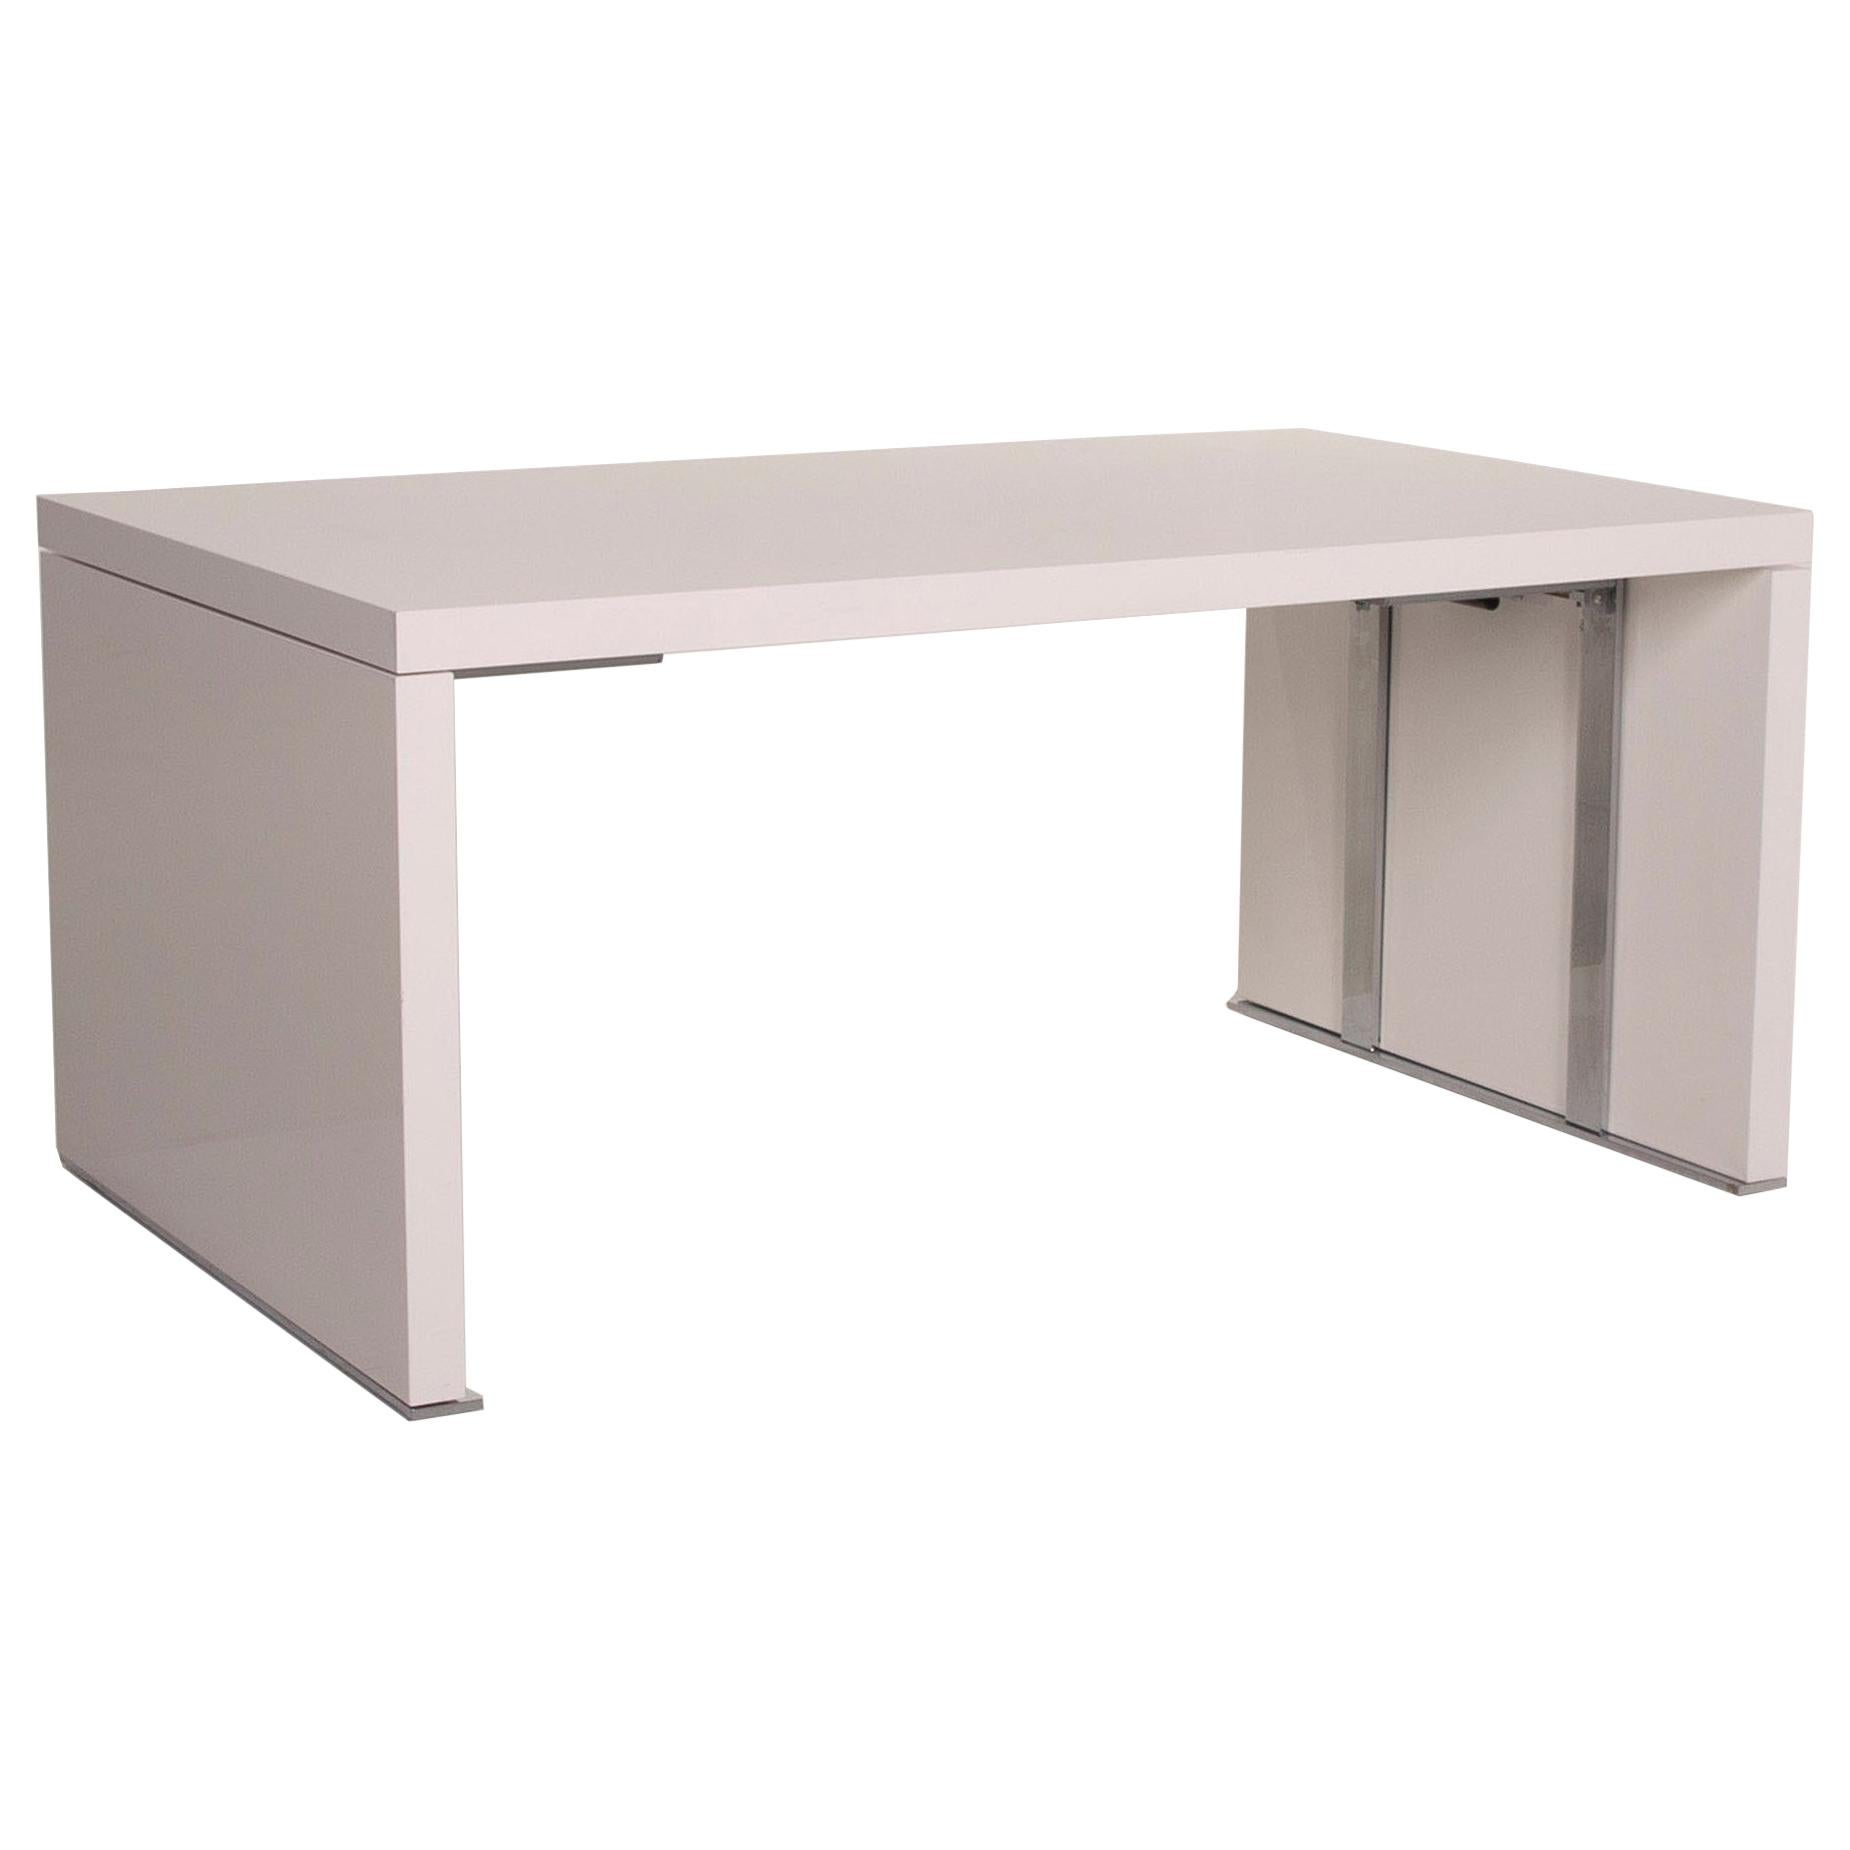 Ligne Roset Wood Table White Dining Table Function Expandable For Sale